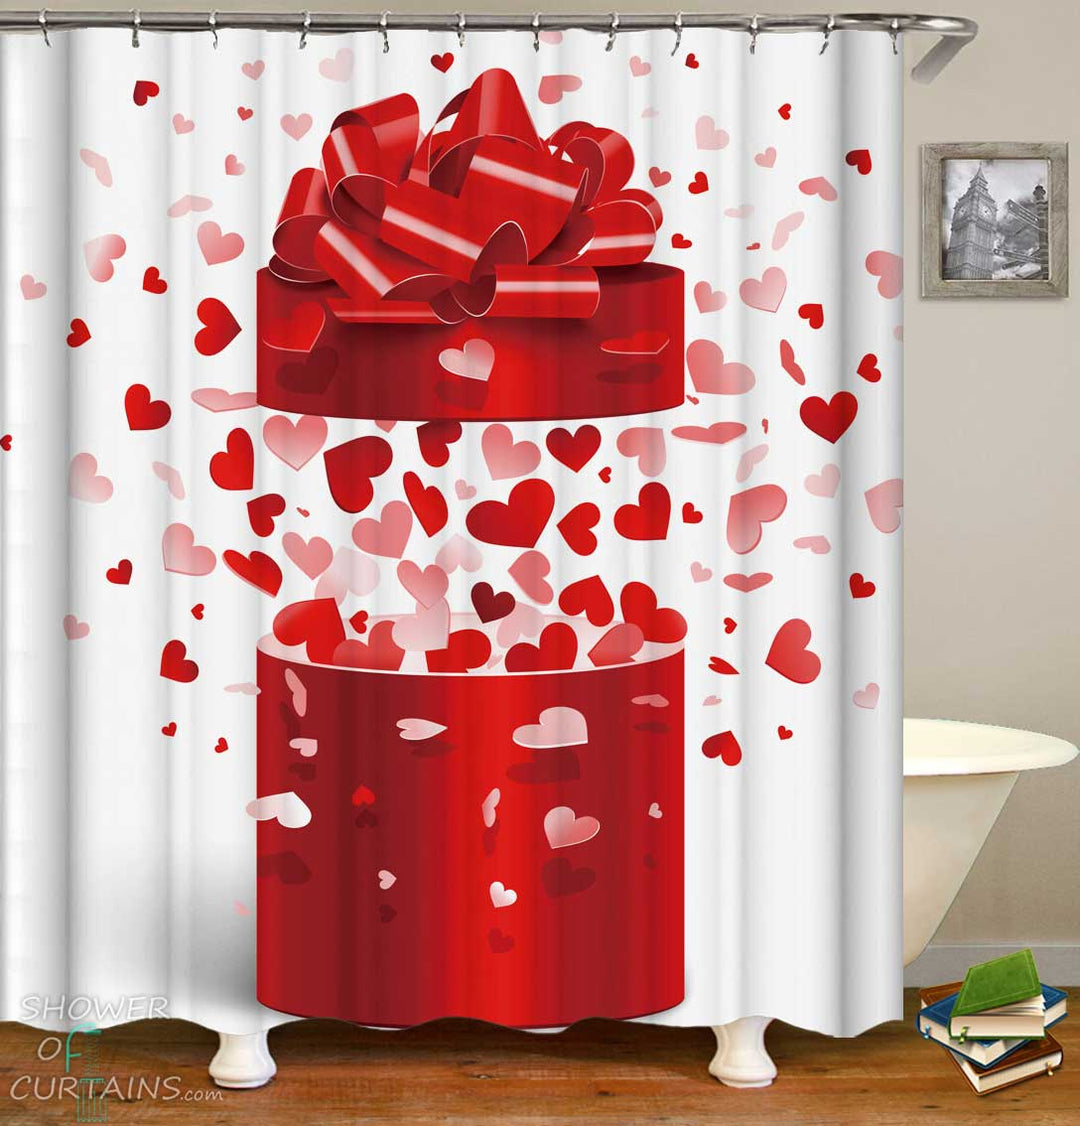 Shower Curtains with Box of Hearts